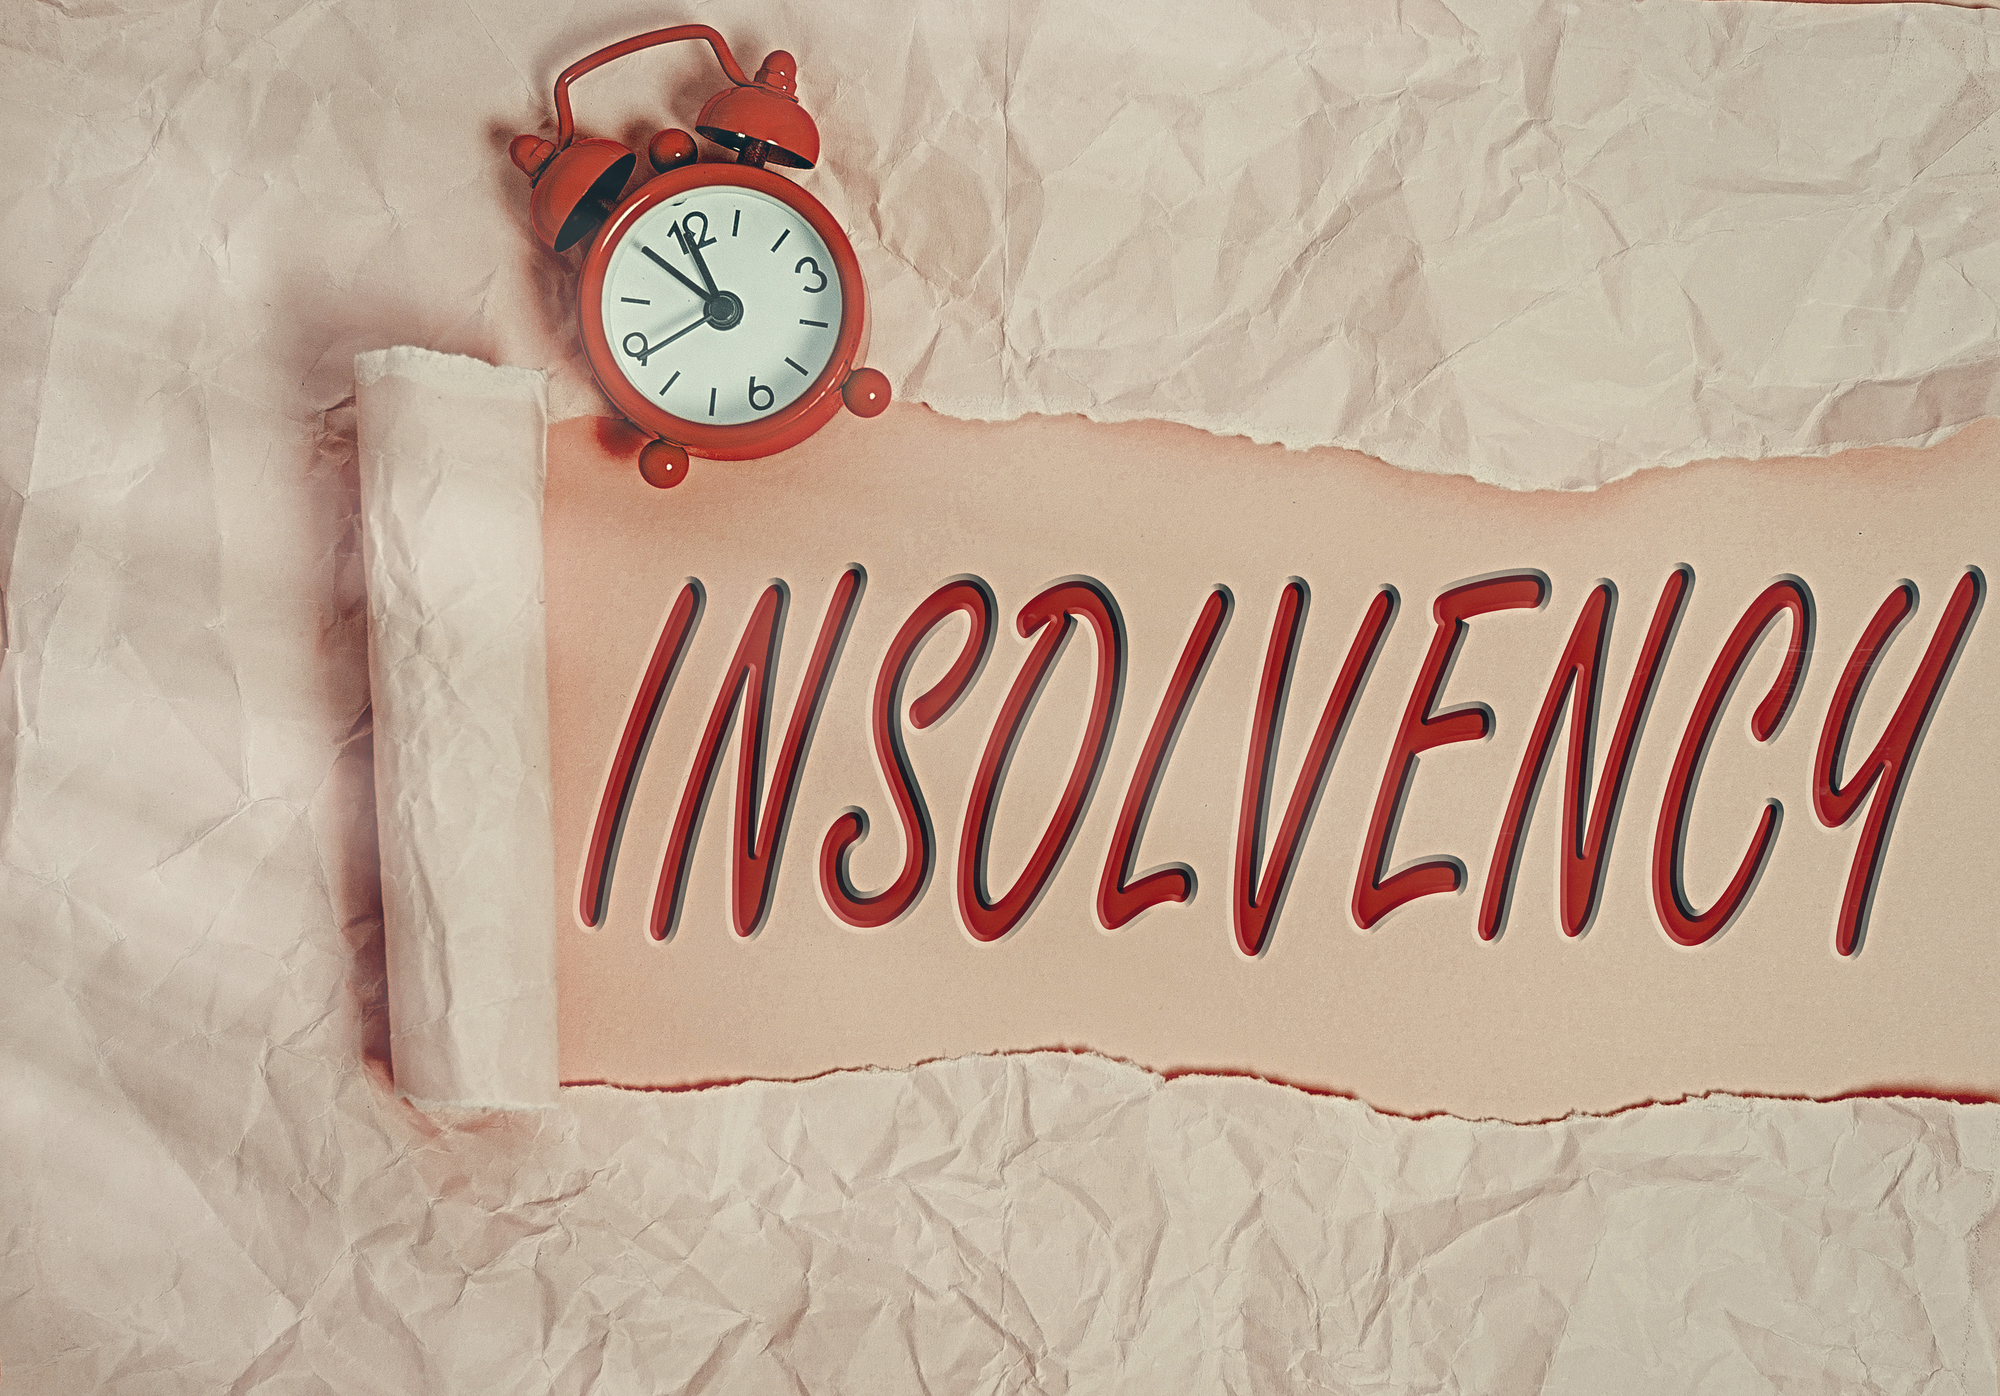 The word insolvency is written on a piece of crumpled paper.